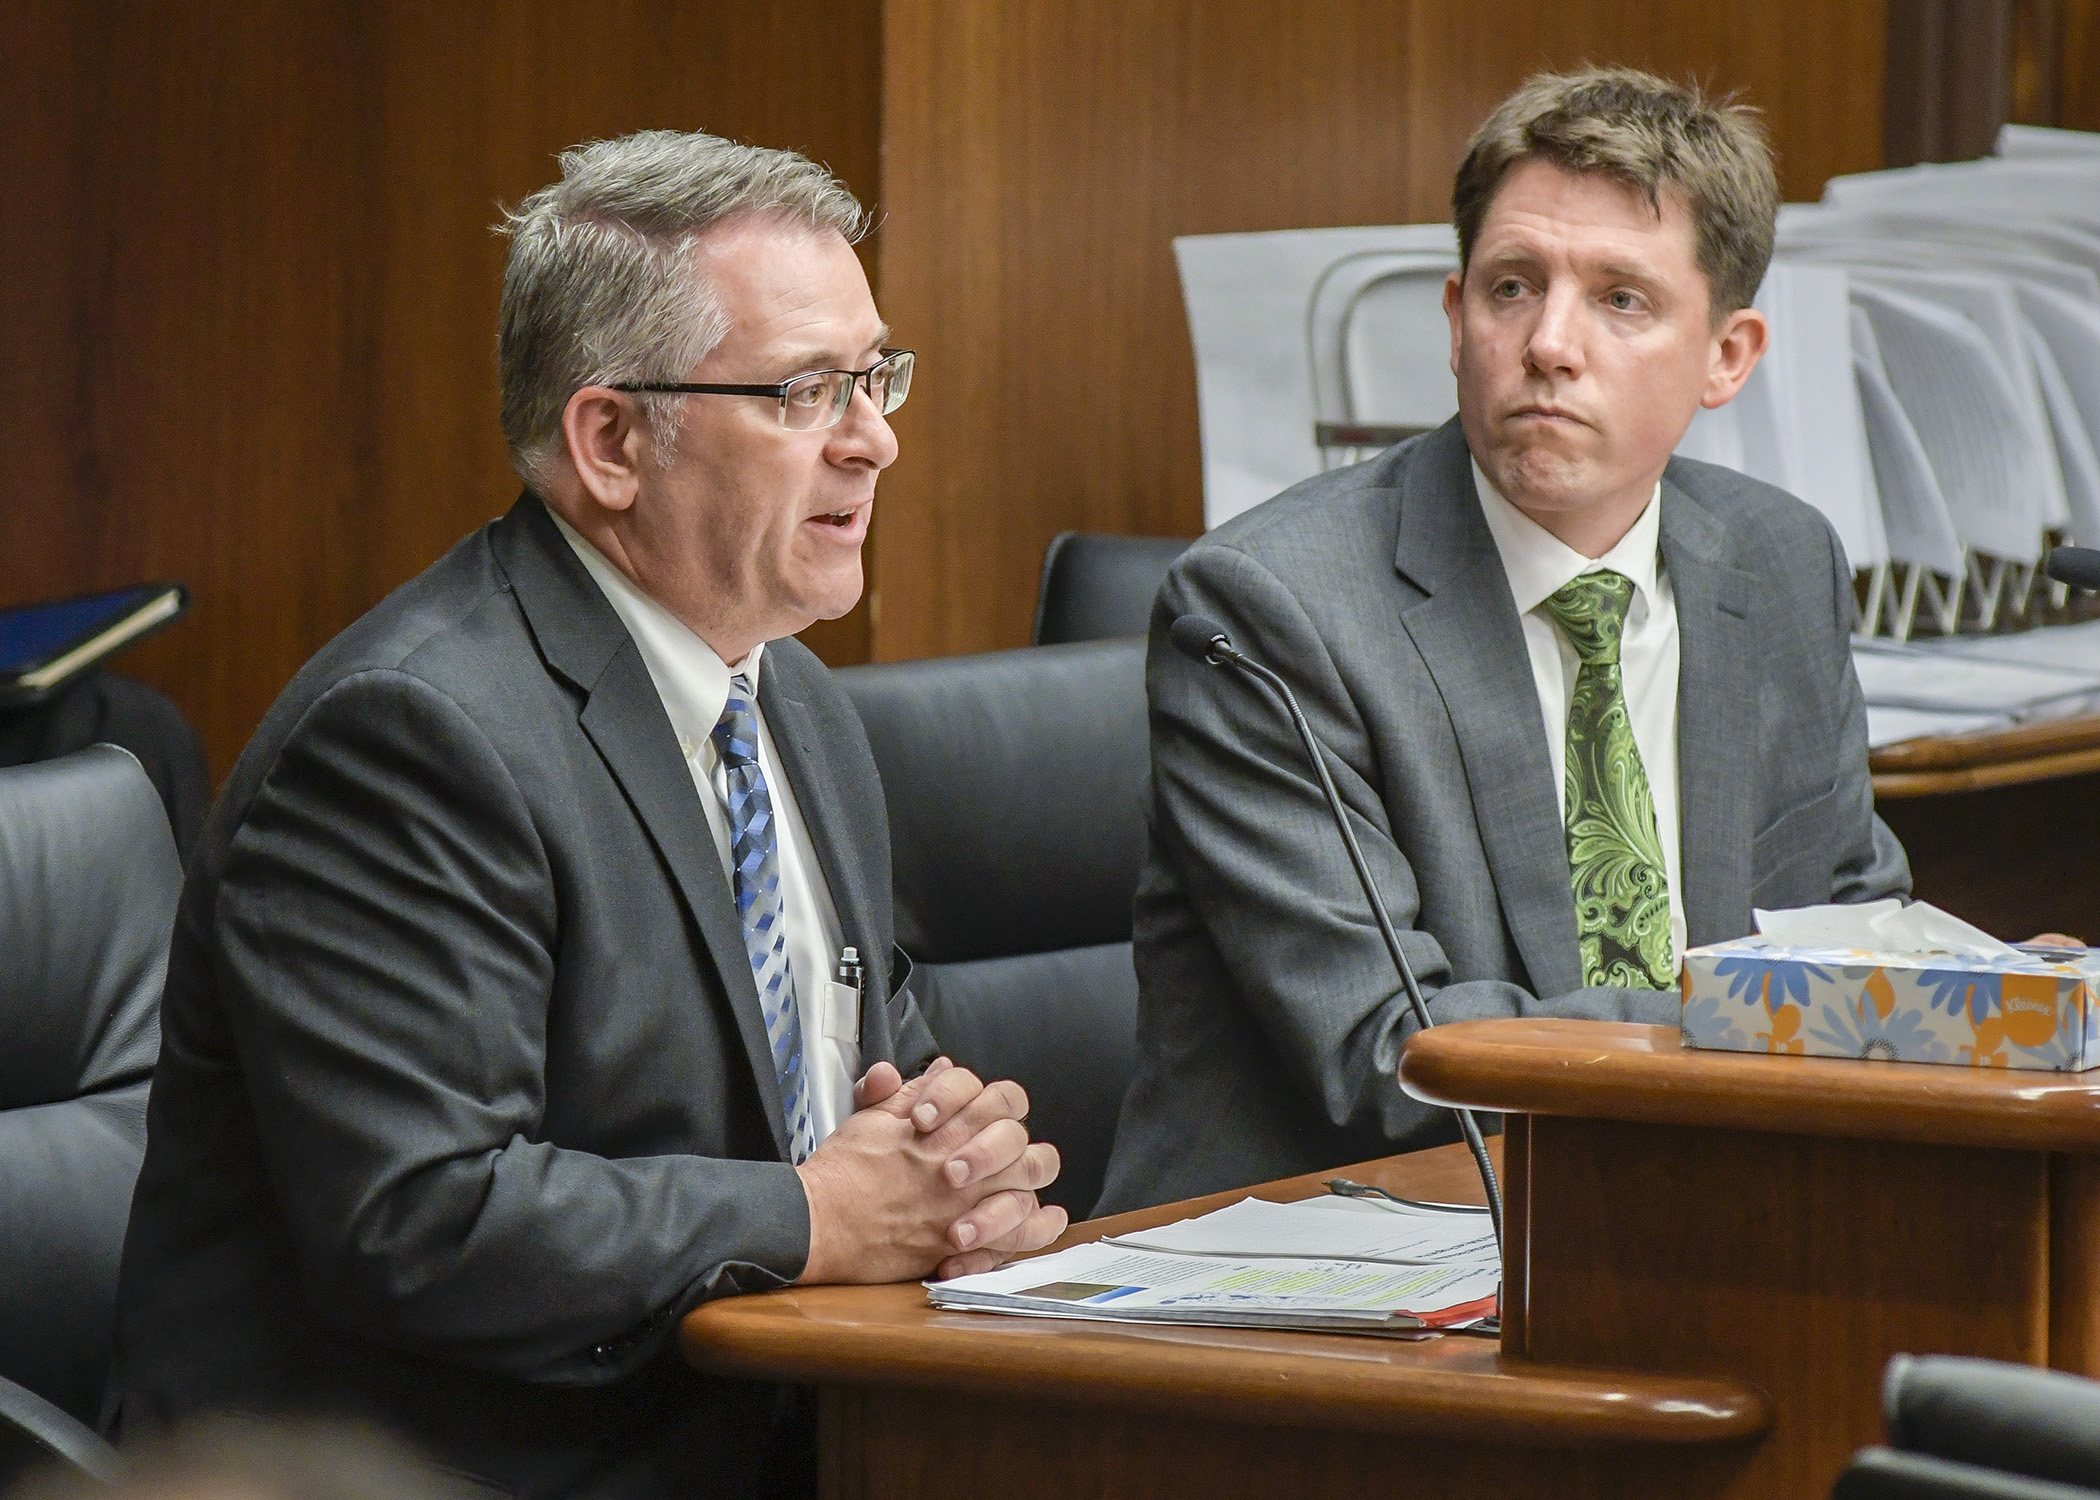 David Weirens, assistant director for the Board of Water and Soil Resources, testifies Feb. 27 during discussion on a bill sponsored by Rep. Todd Lippert, right, that would establish a drinking water protection pilot program. Photo by Andrew VonBank